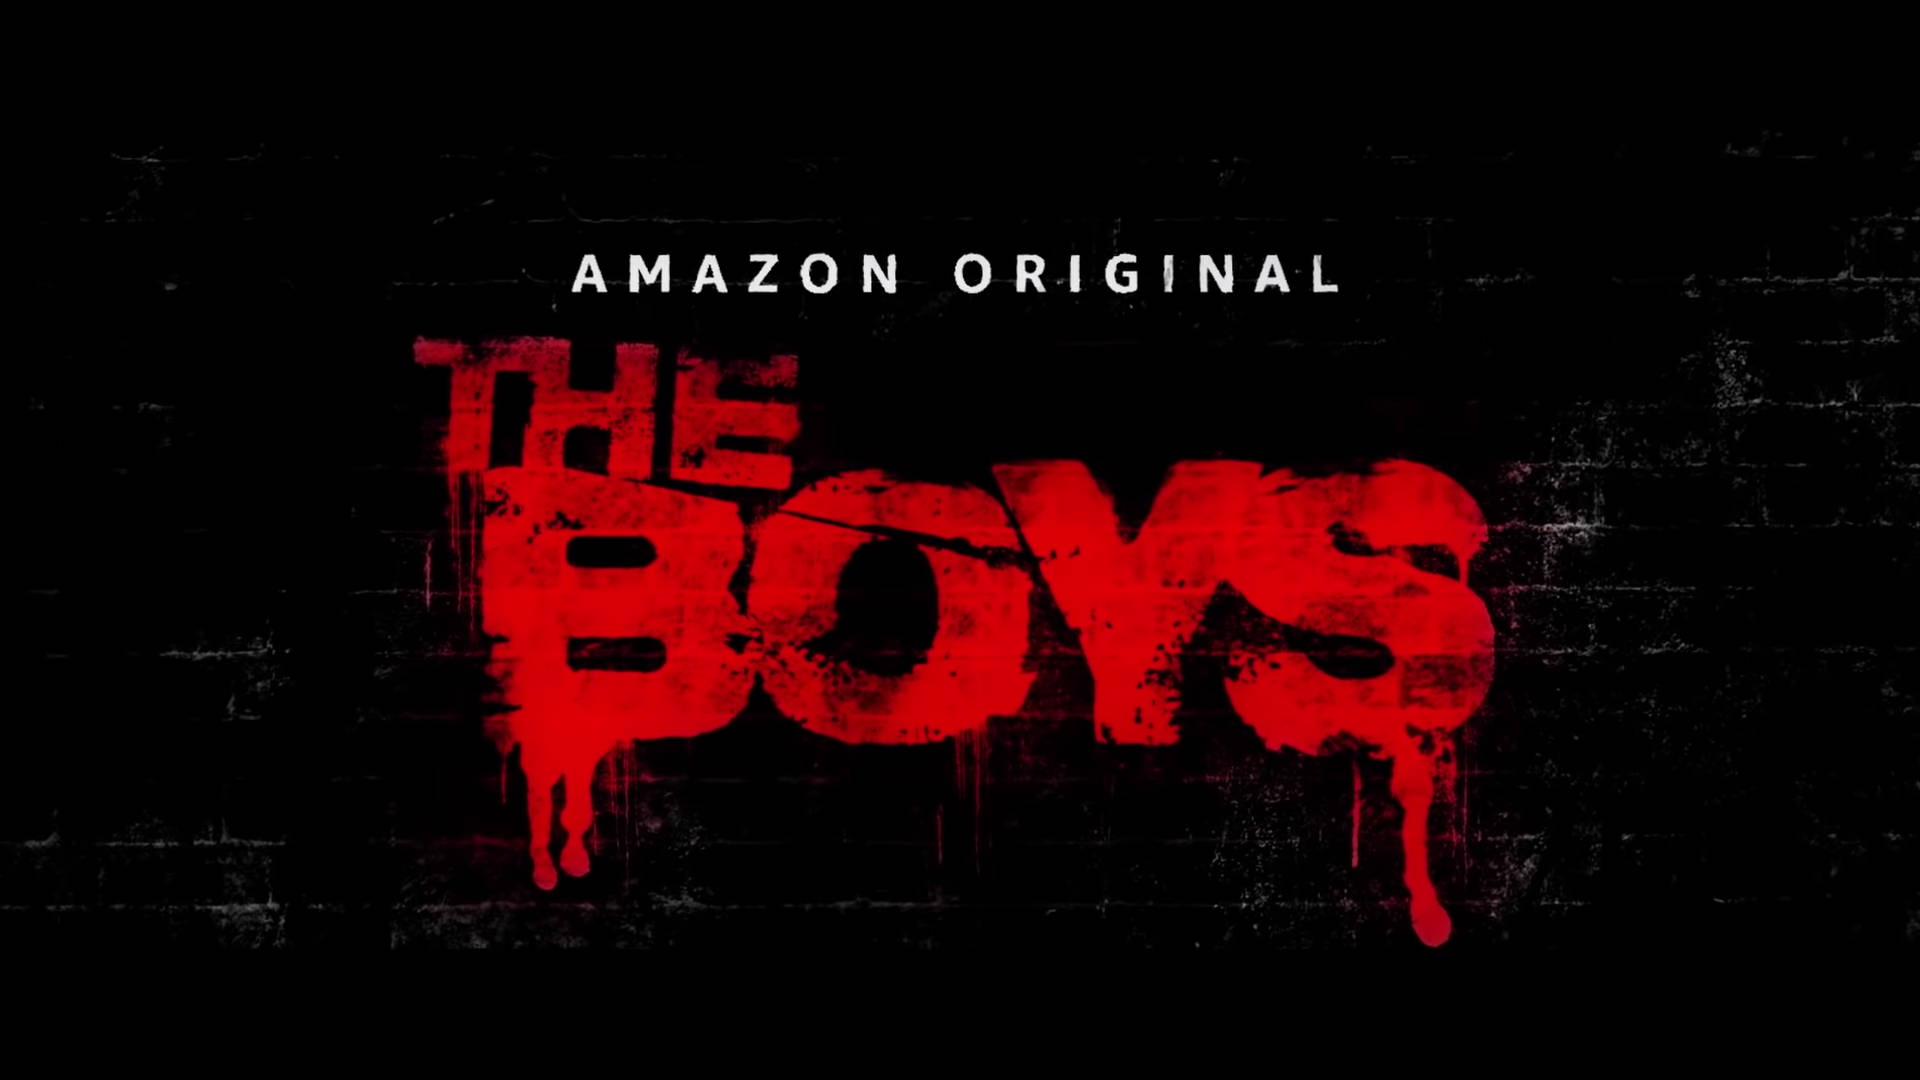 Intense Stare Of The Boys From Amazon Original Series